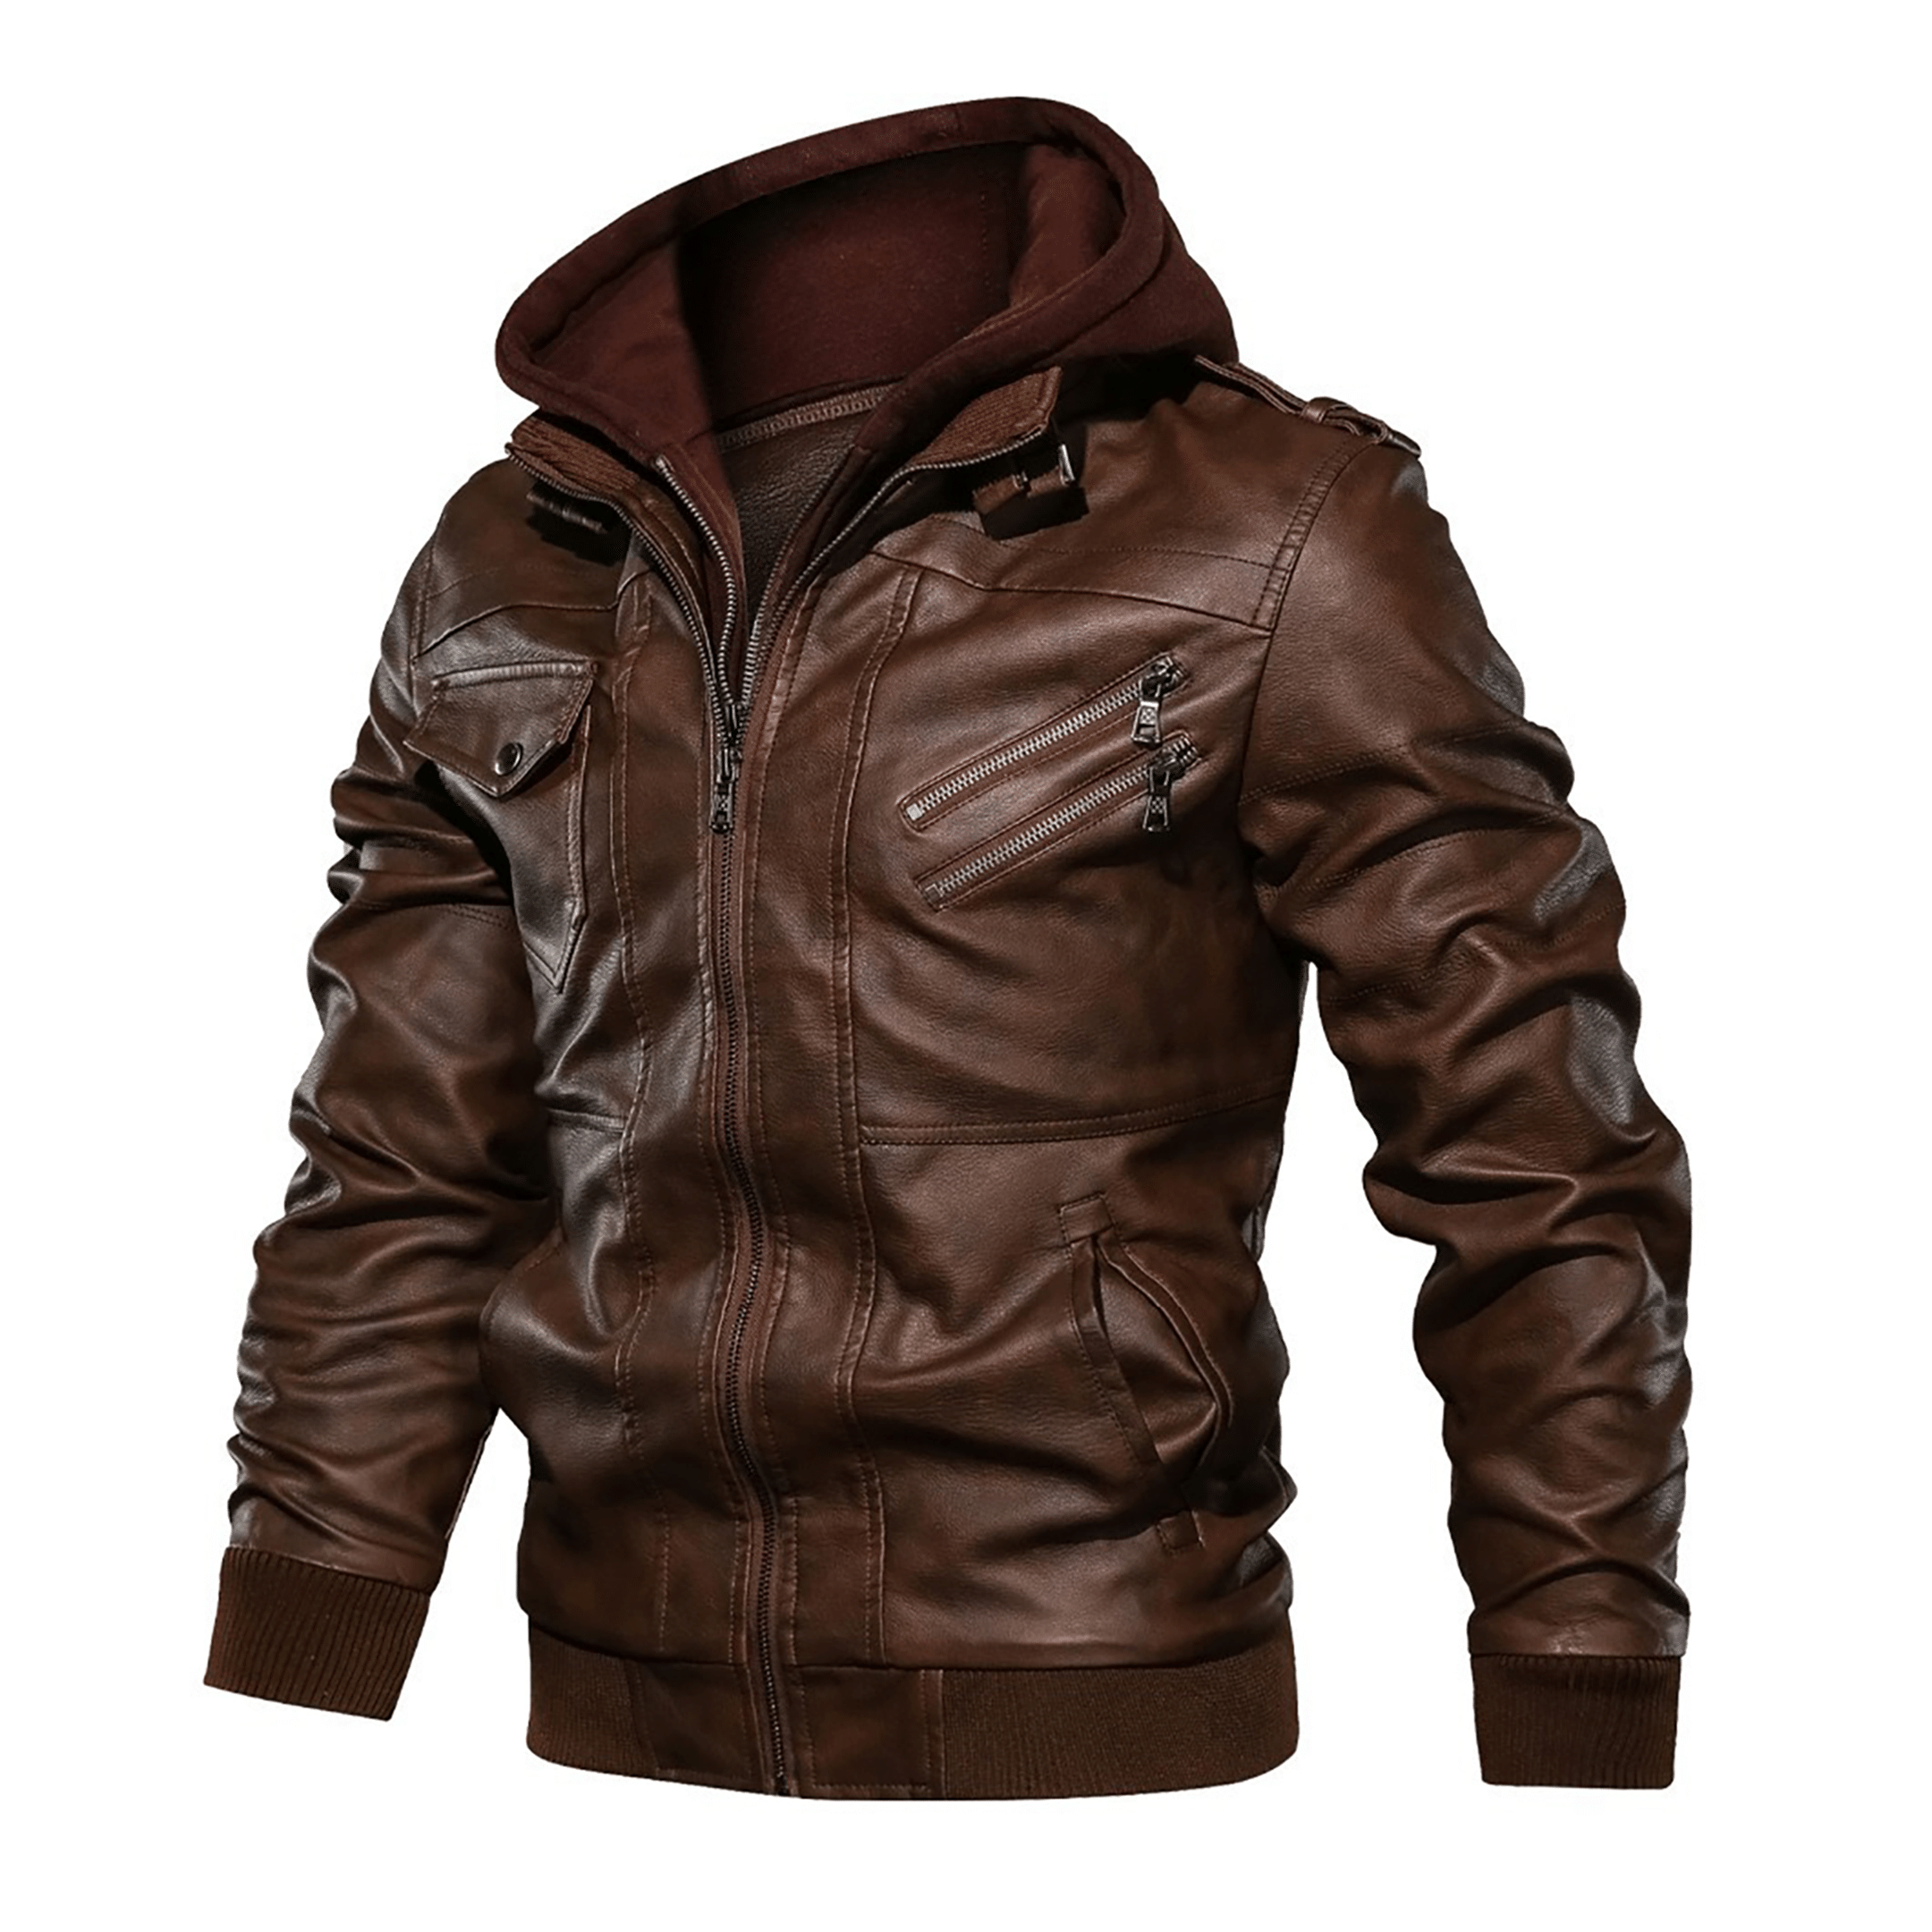 Top leather jackets and latest products 483